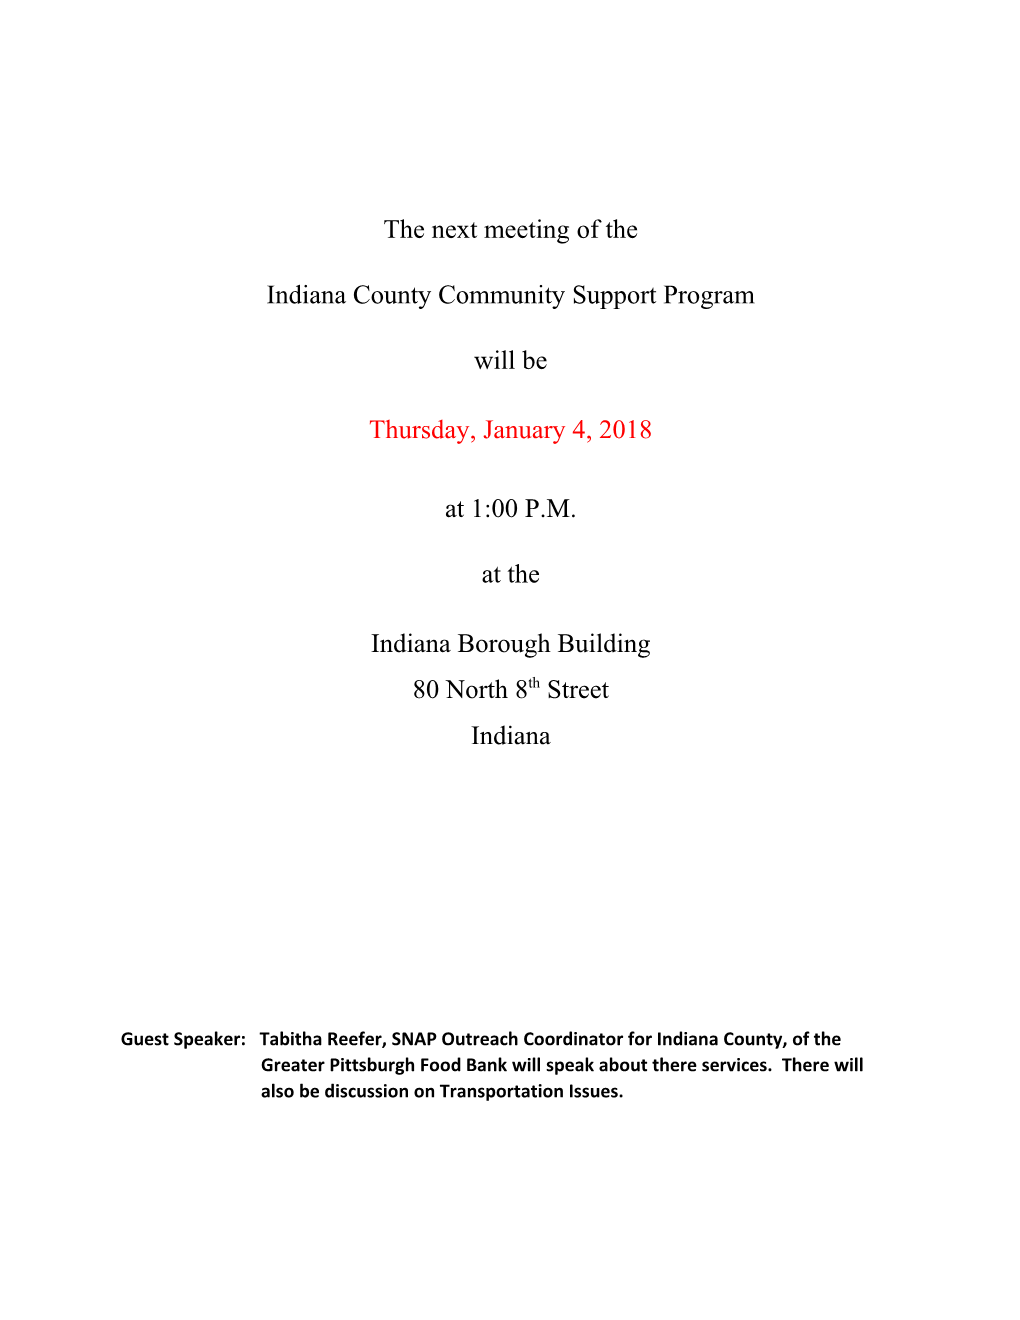 The Next Meeting of the Indiana County Community Support Program Will Be